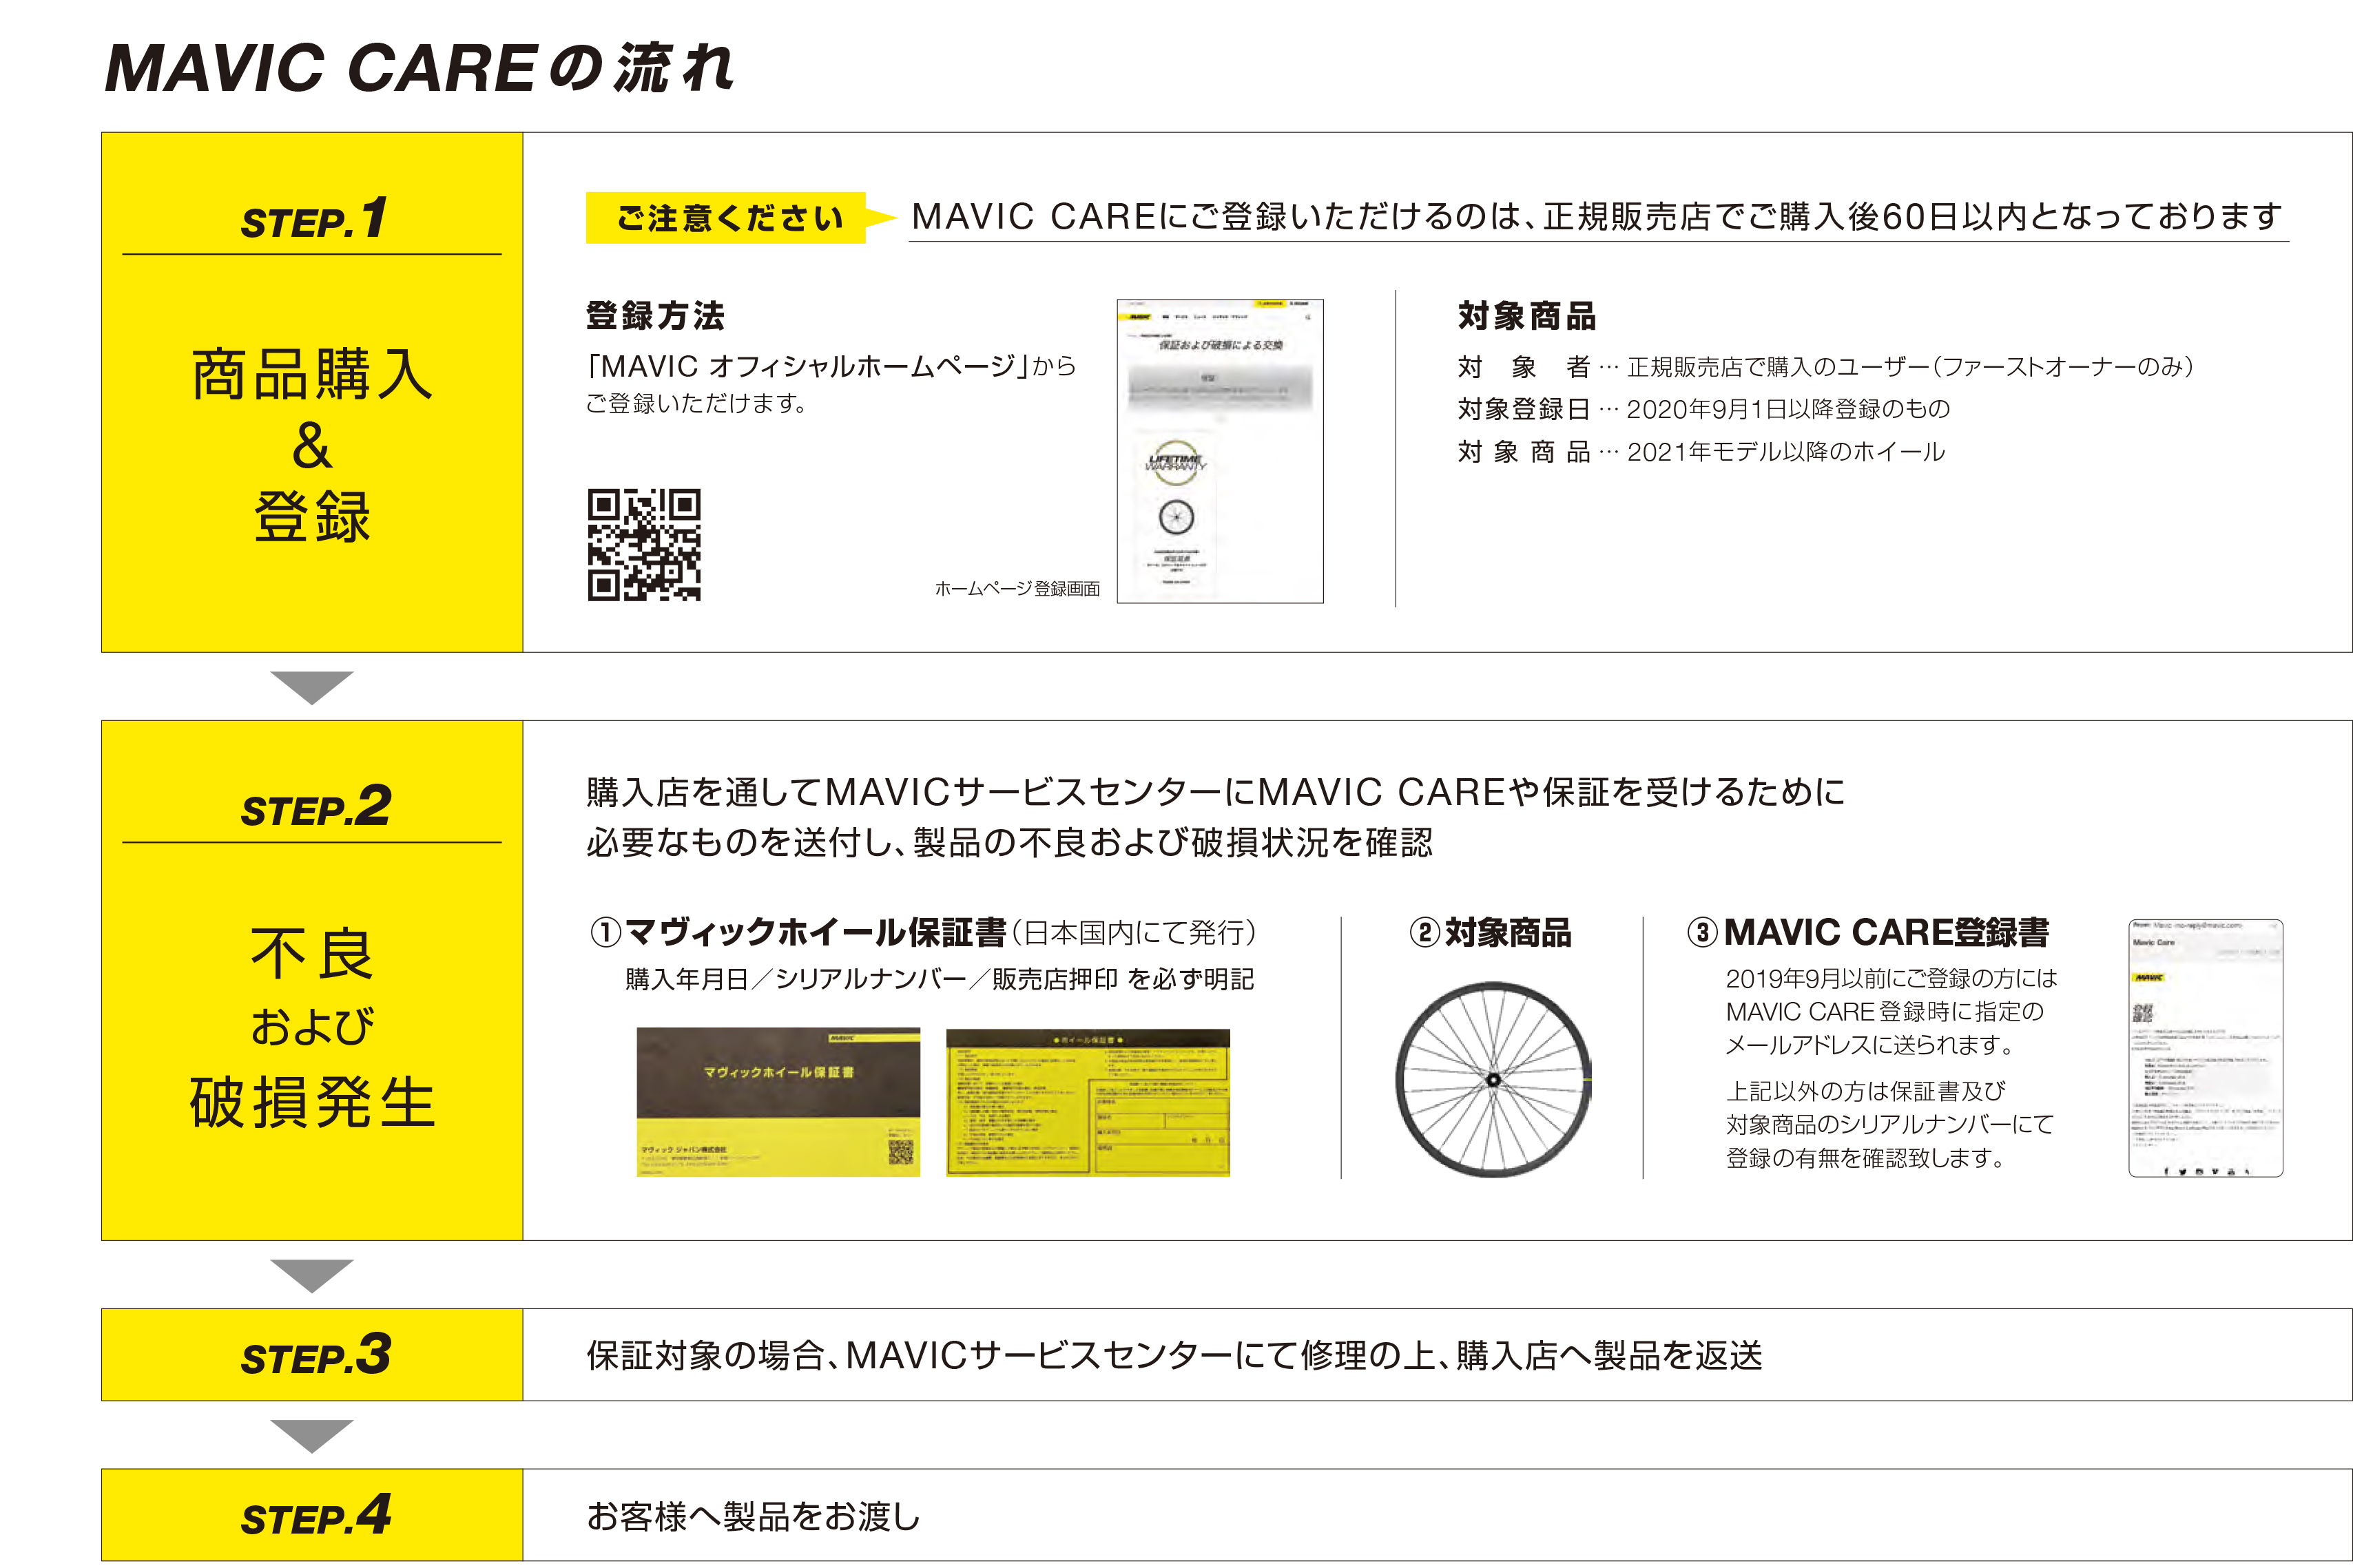 MAVIC CARE FOR CARBON マビック 保証 説明3